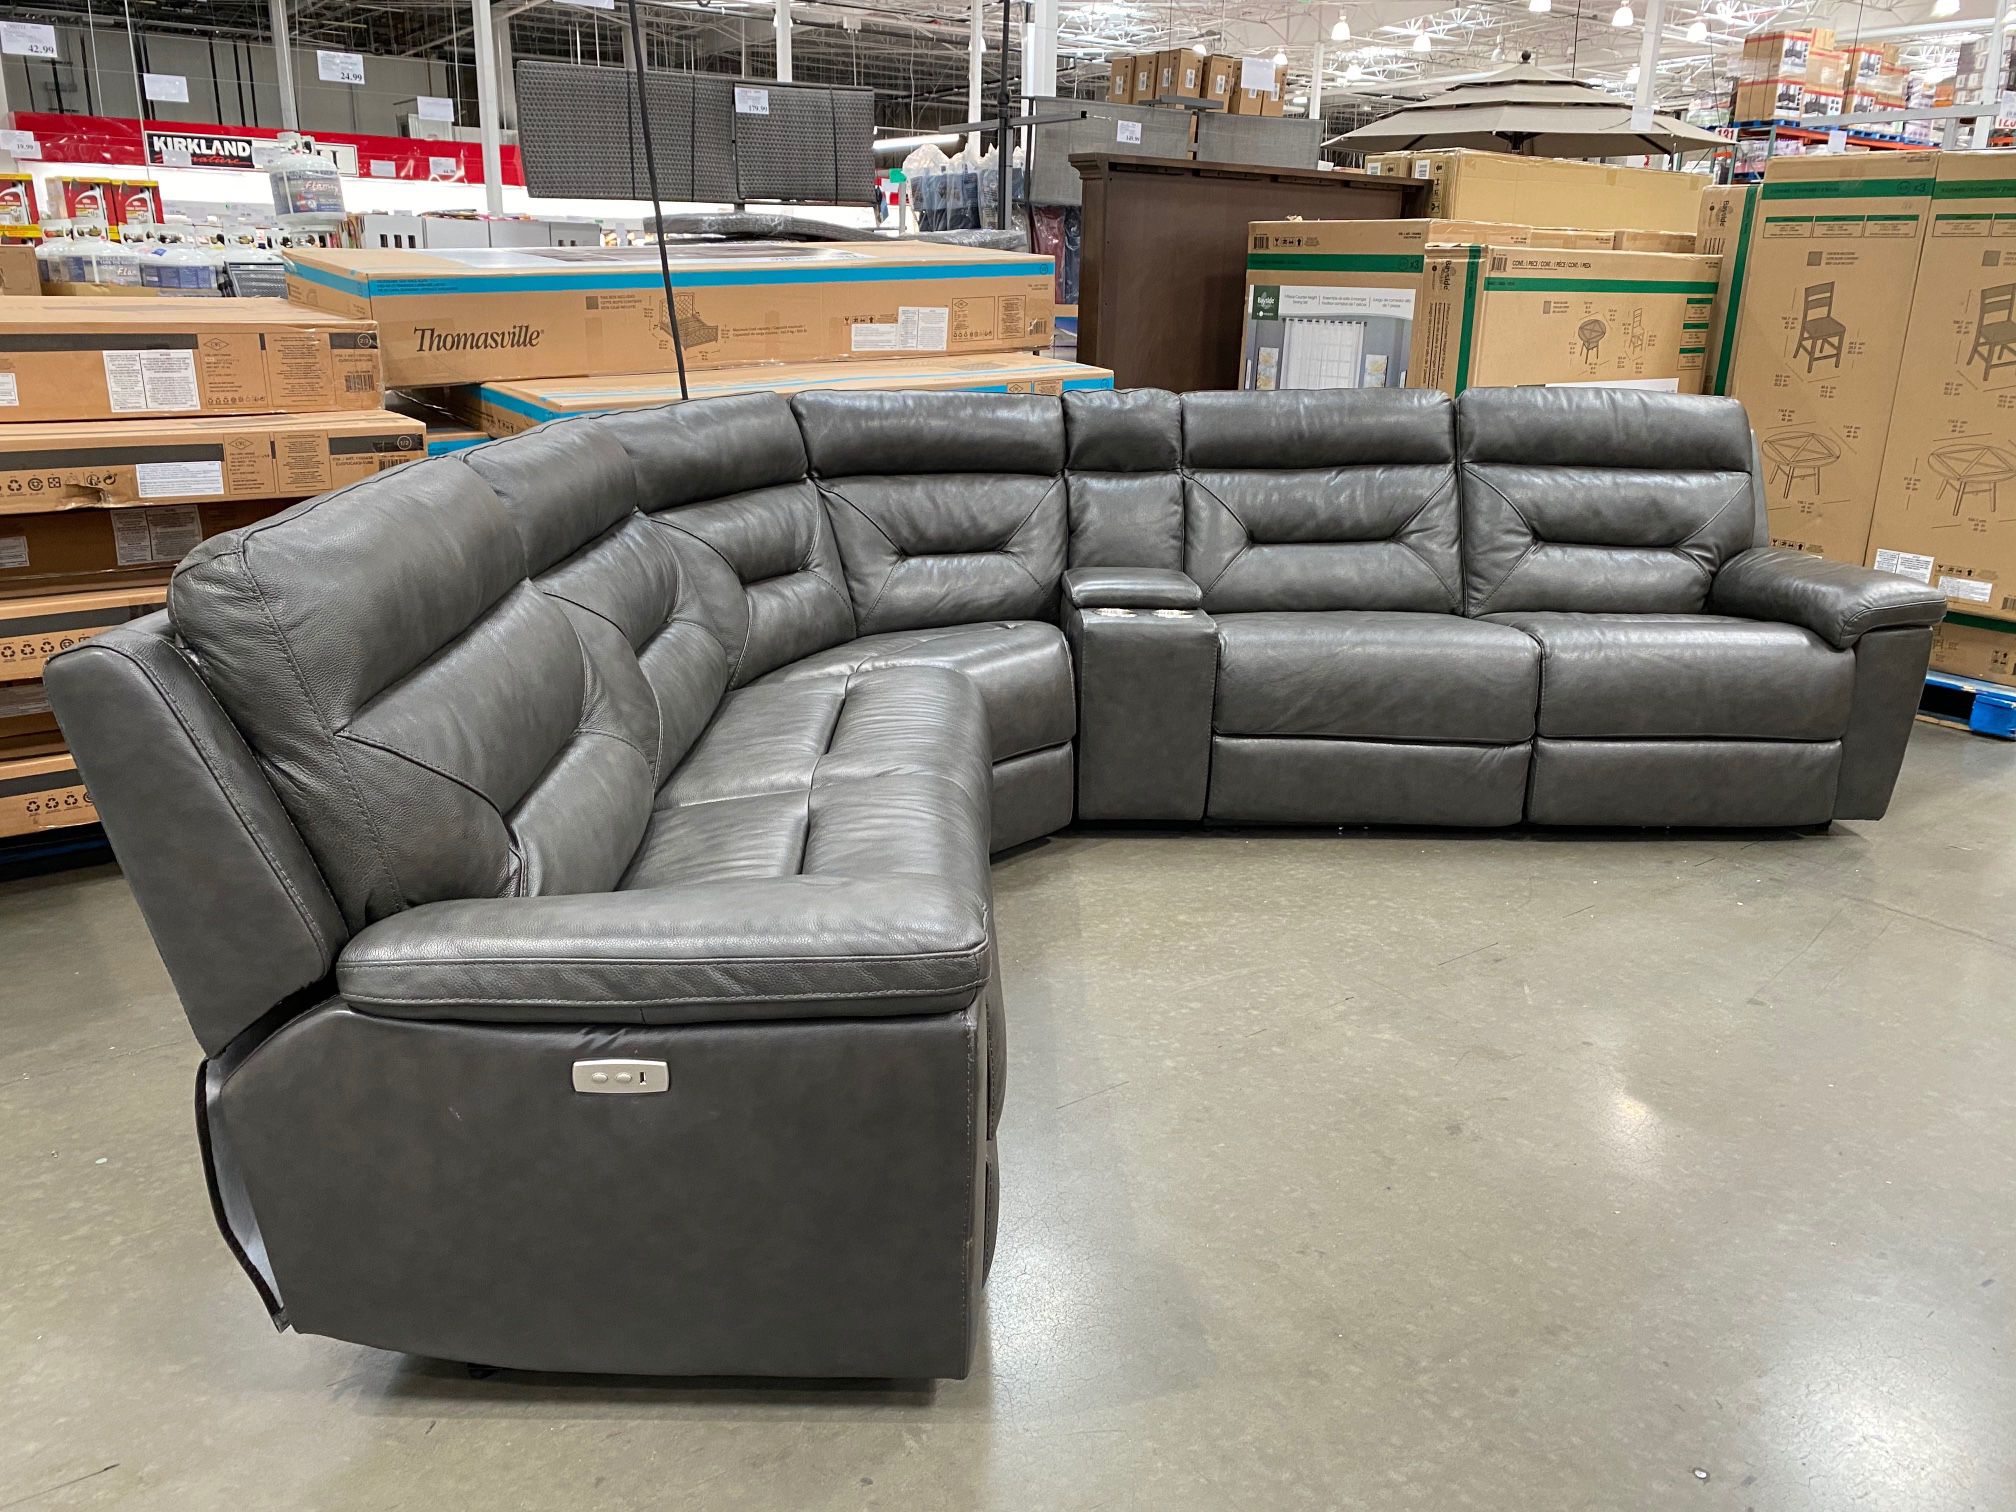 Costco Corry Leather Power Reclining, Corry 6 Piece Leather Power Reclining Sectional Sofa Brown